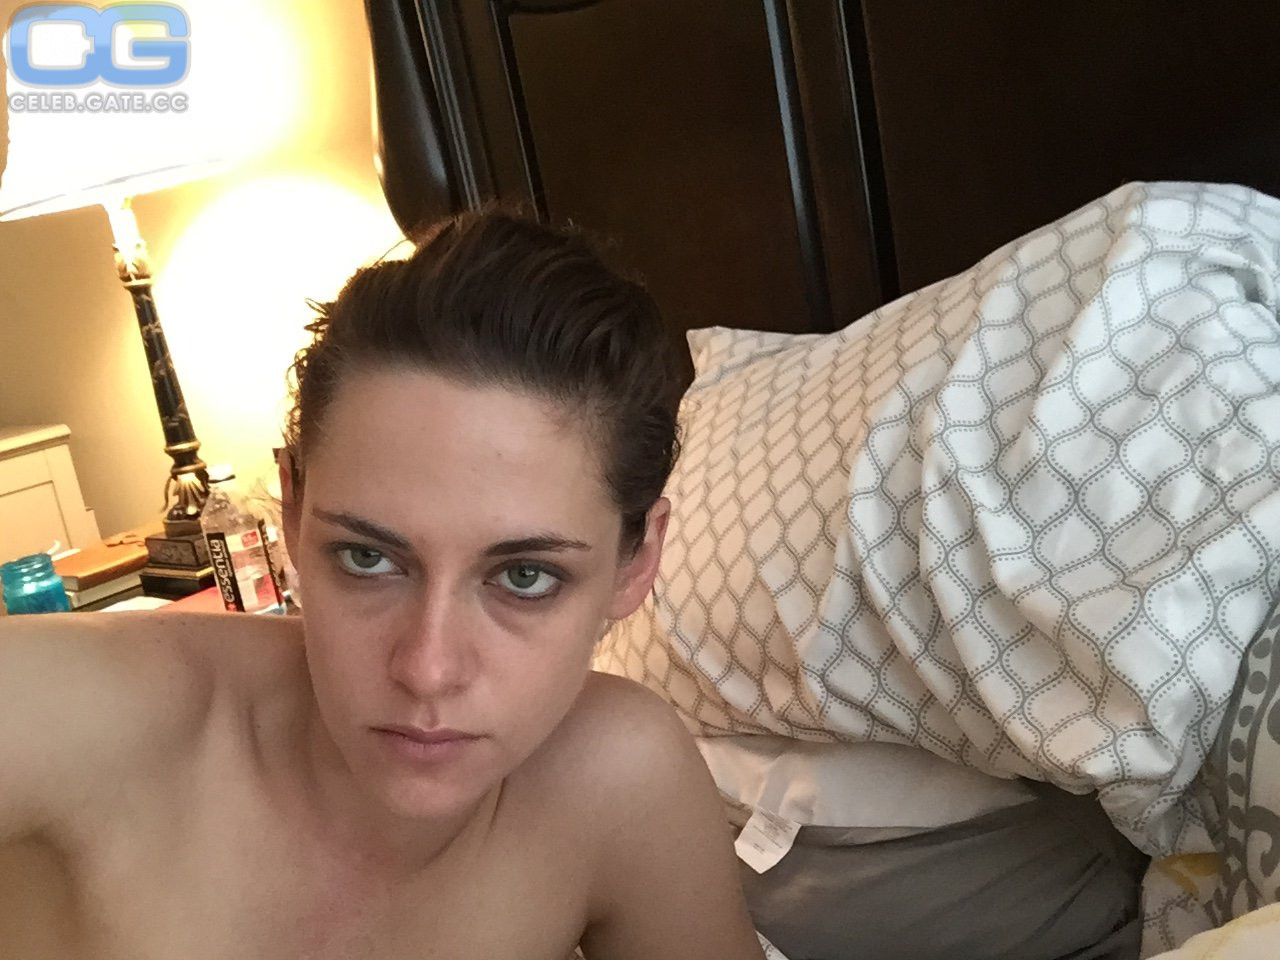 Stewart the fappening kristen The Fappening